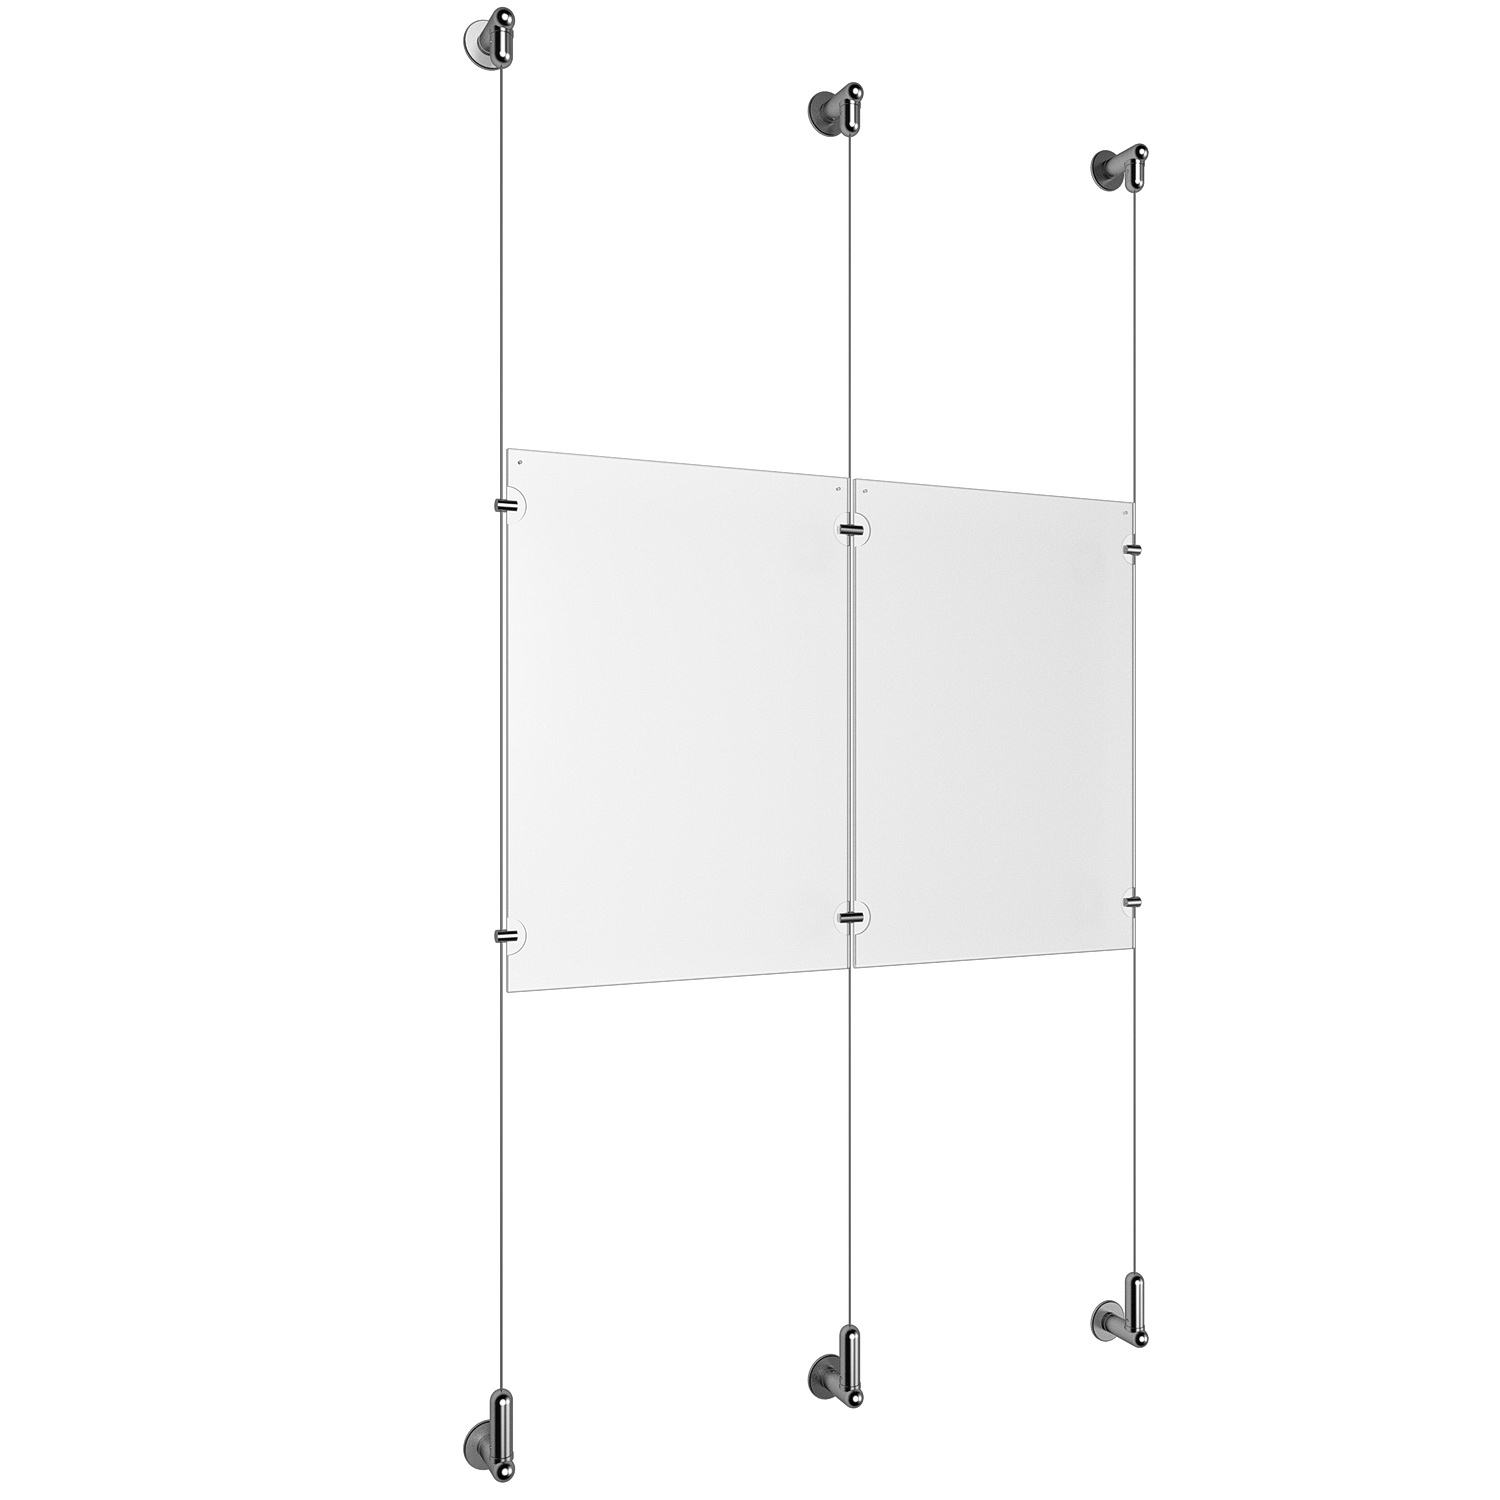 (2) 11'' Width x 17'' Height Clear Acrylic Frame & (3) Wall-to-Wall Aluminum Clear Anodized Cable Systems with (4) Single-Sided Panel Grippers (2) Double-Sided Panel Grippers